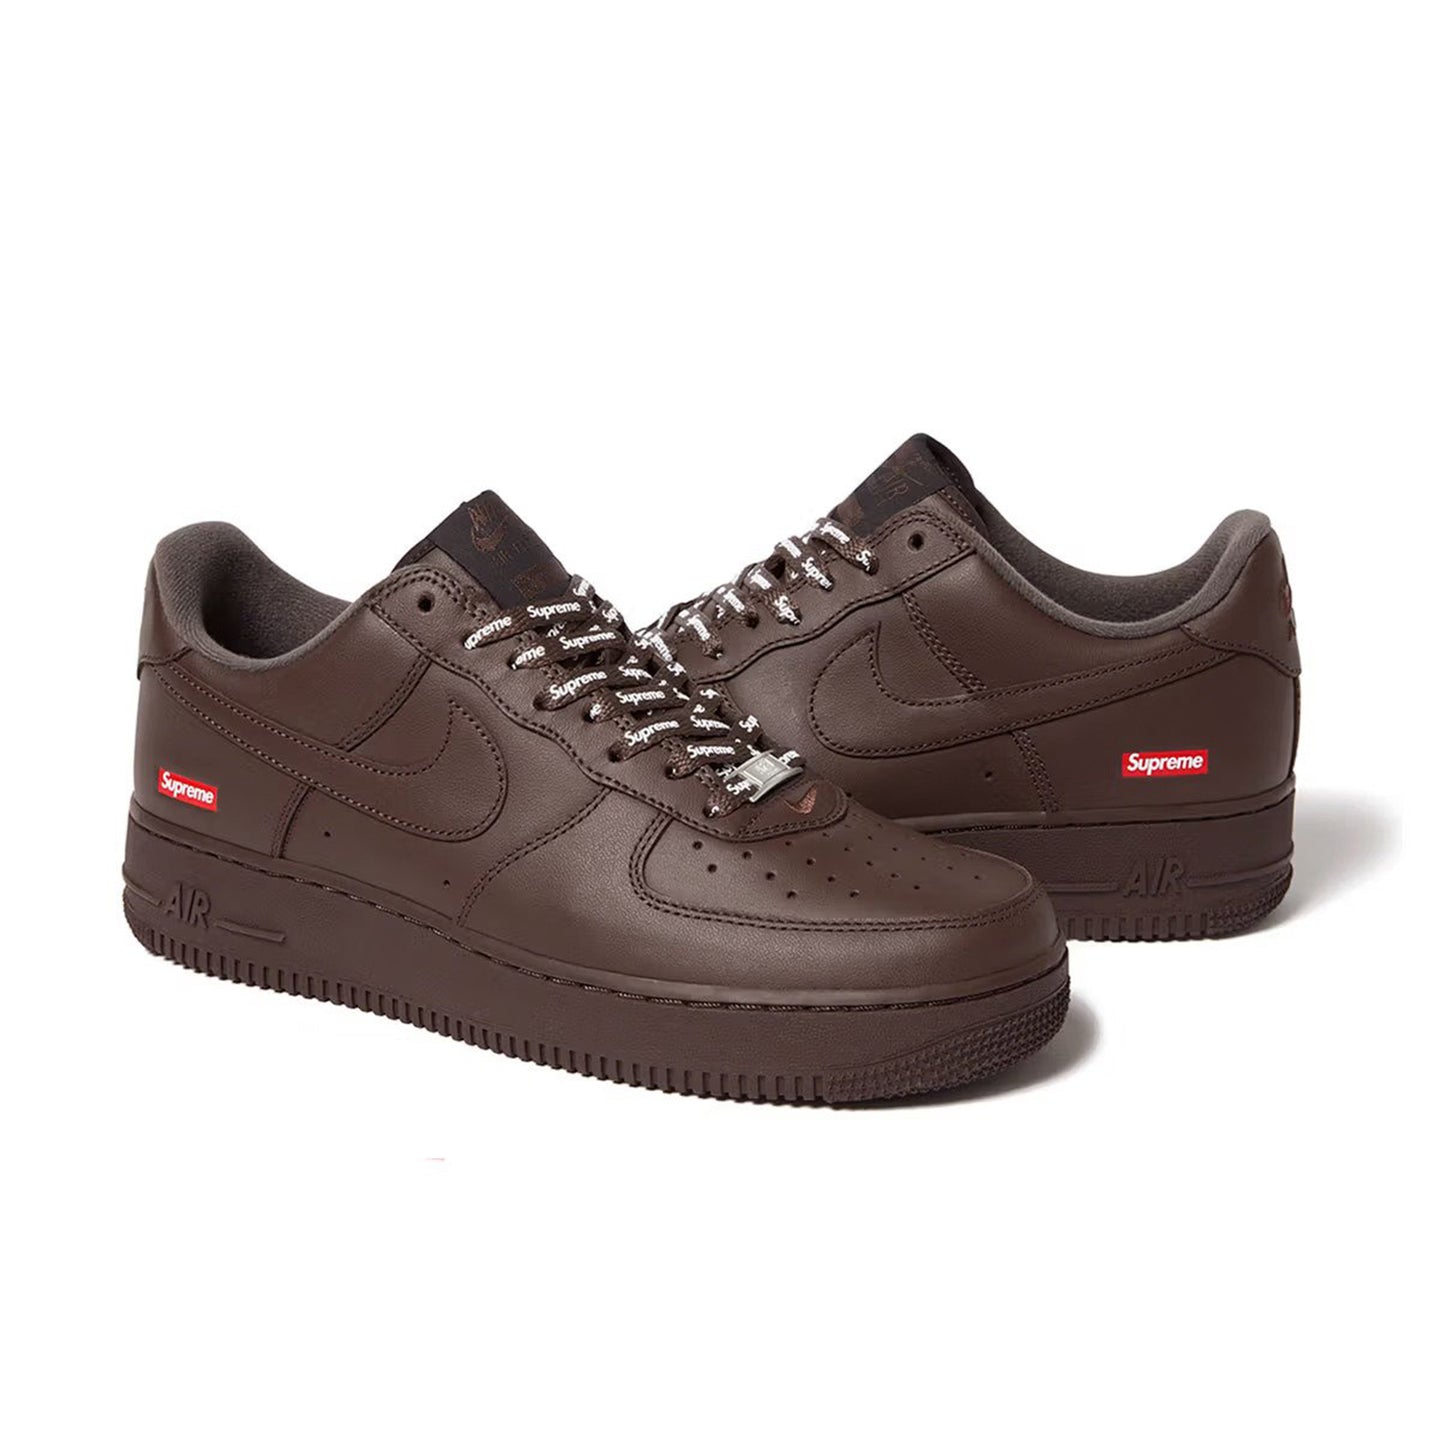 nike x air force 1 low supreme baraque brown